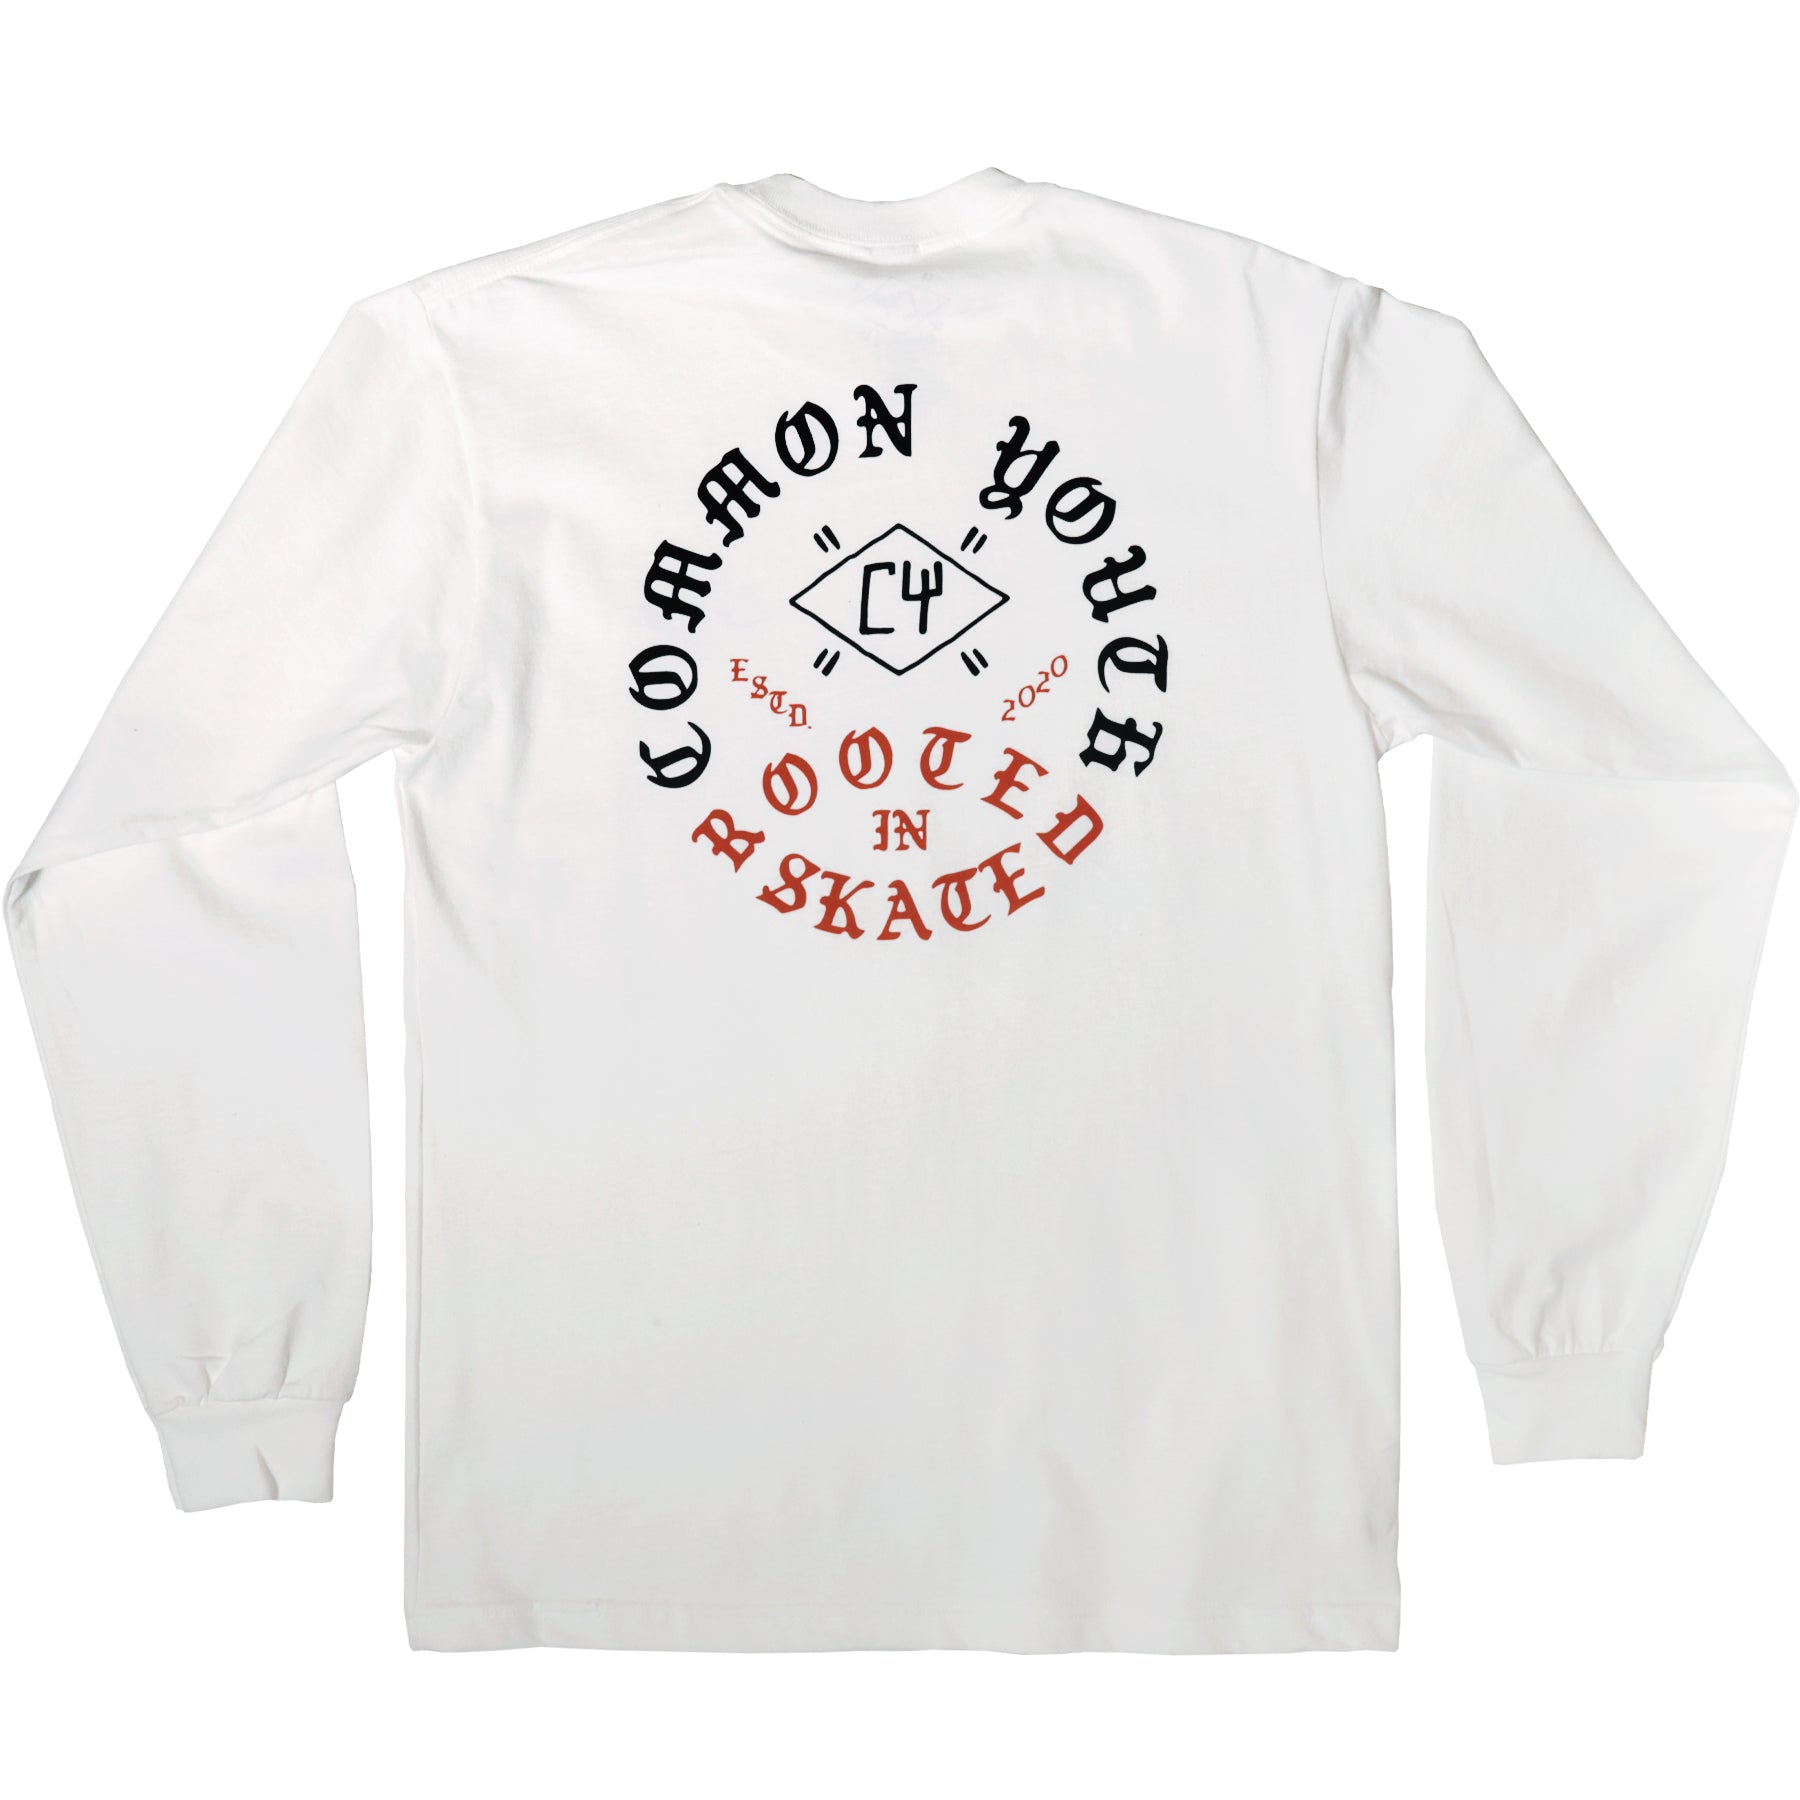 CHAIN LINK LS - commonyouthbrand